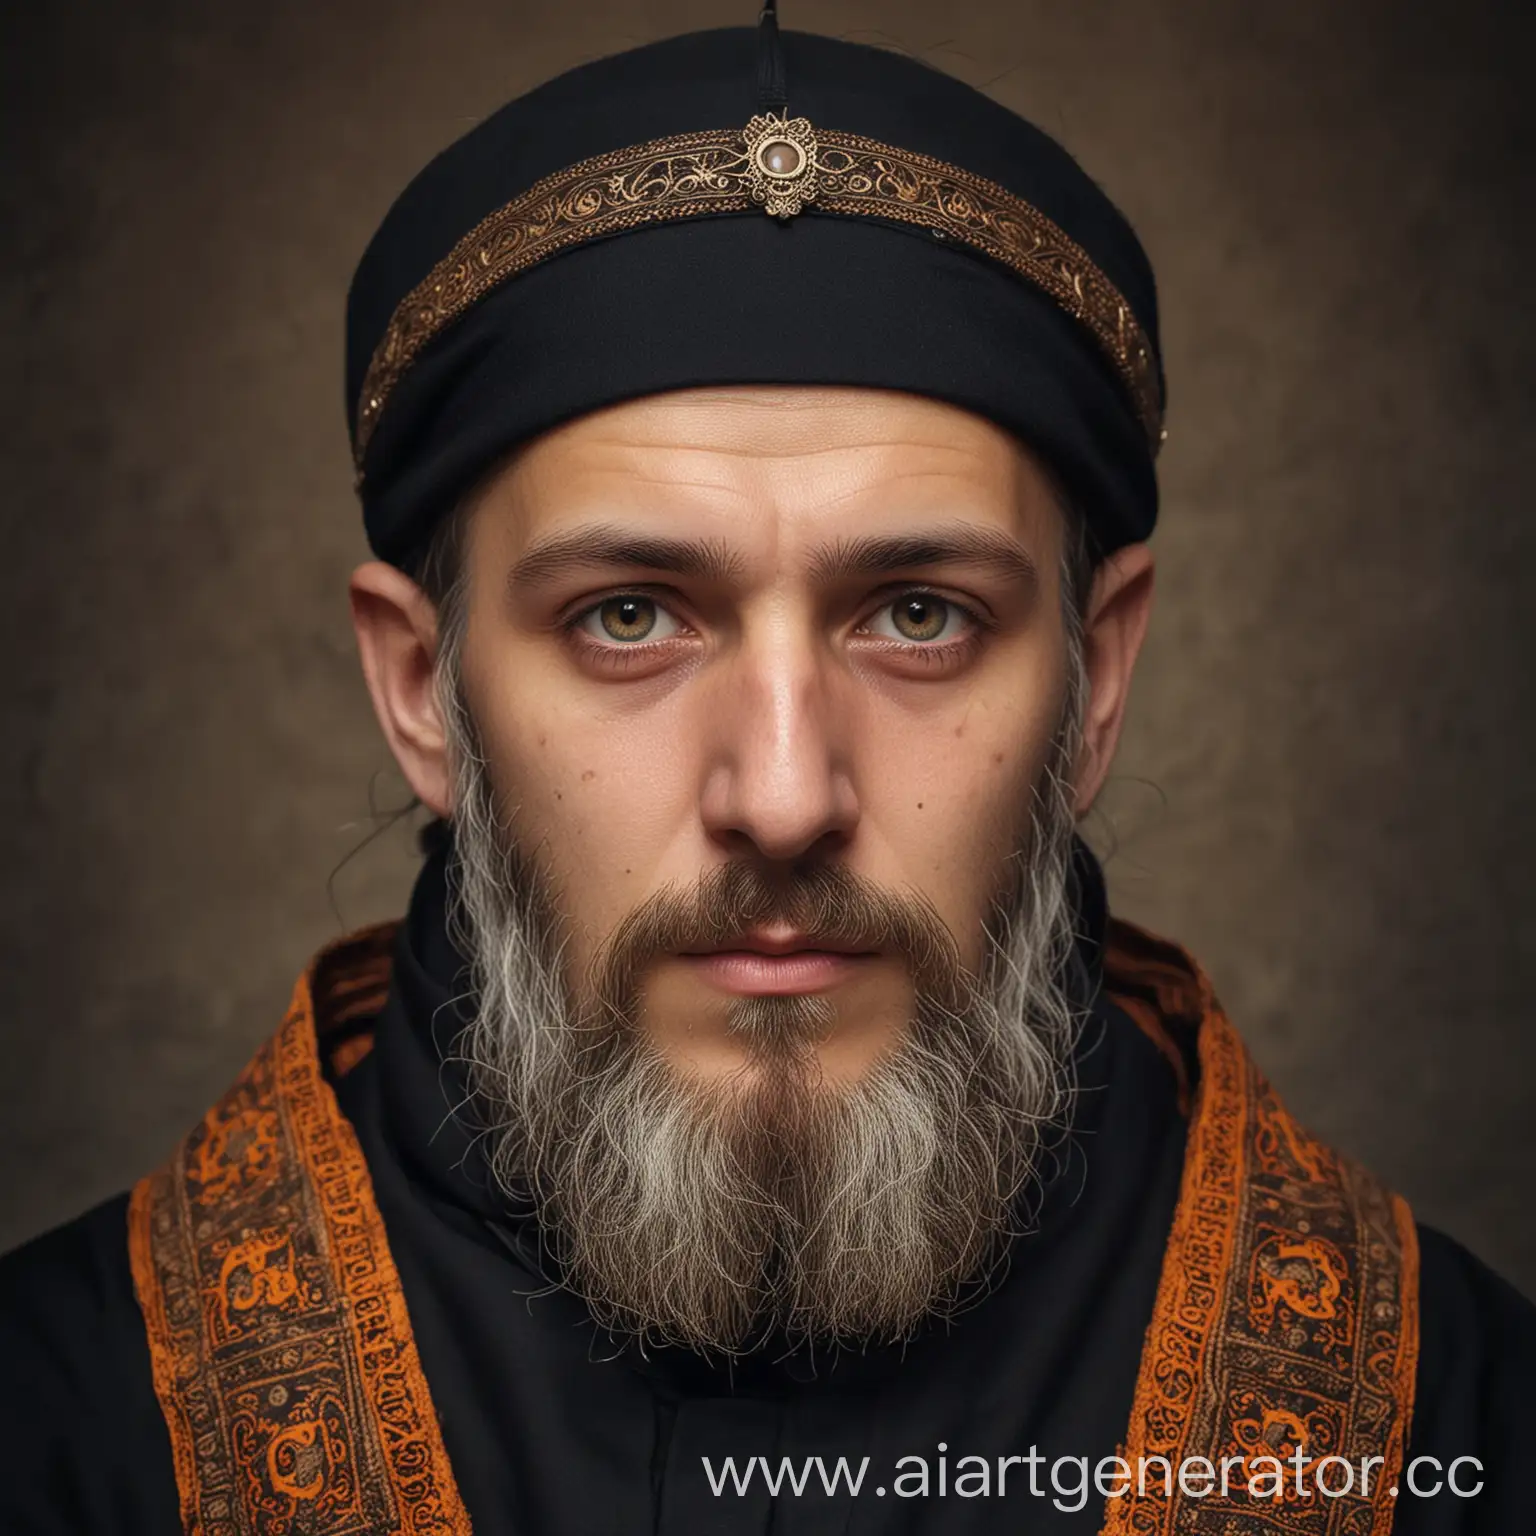 Authentic-Orthodox-Monk-with-Wise-Eyes-in-Traditional-Clothing